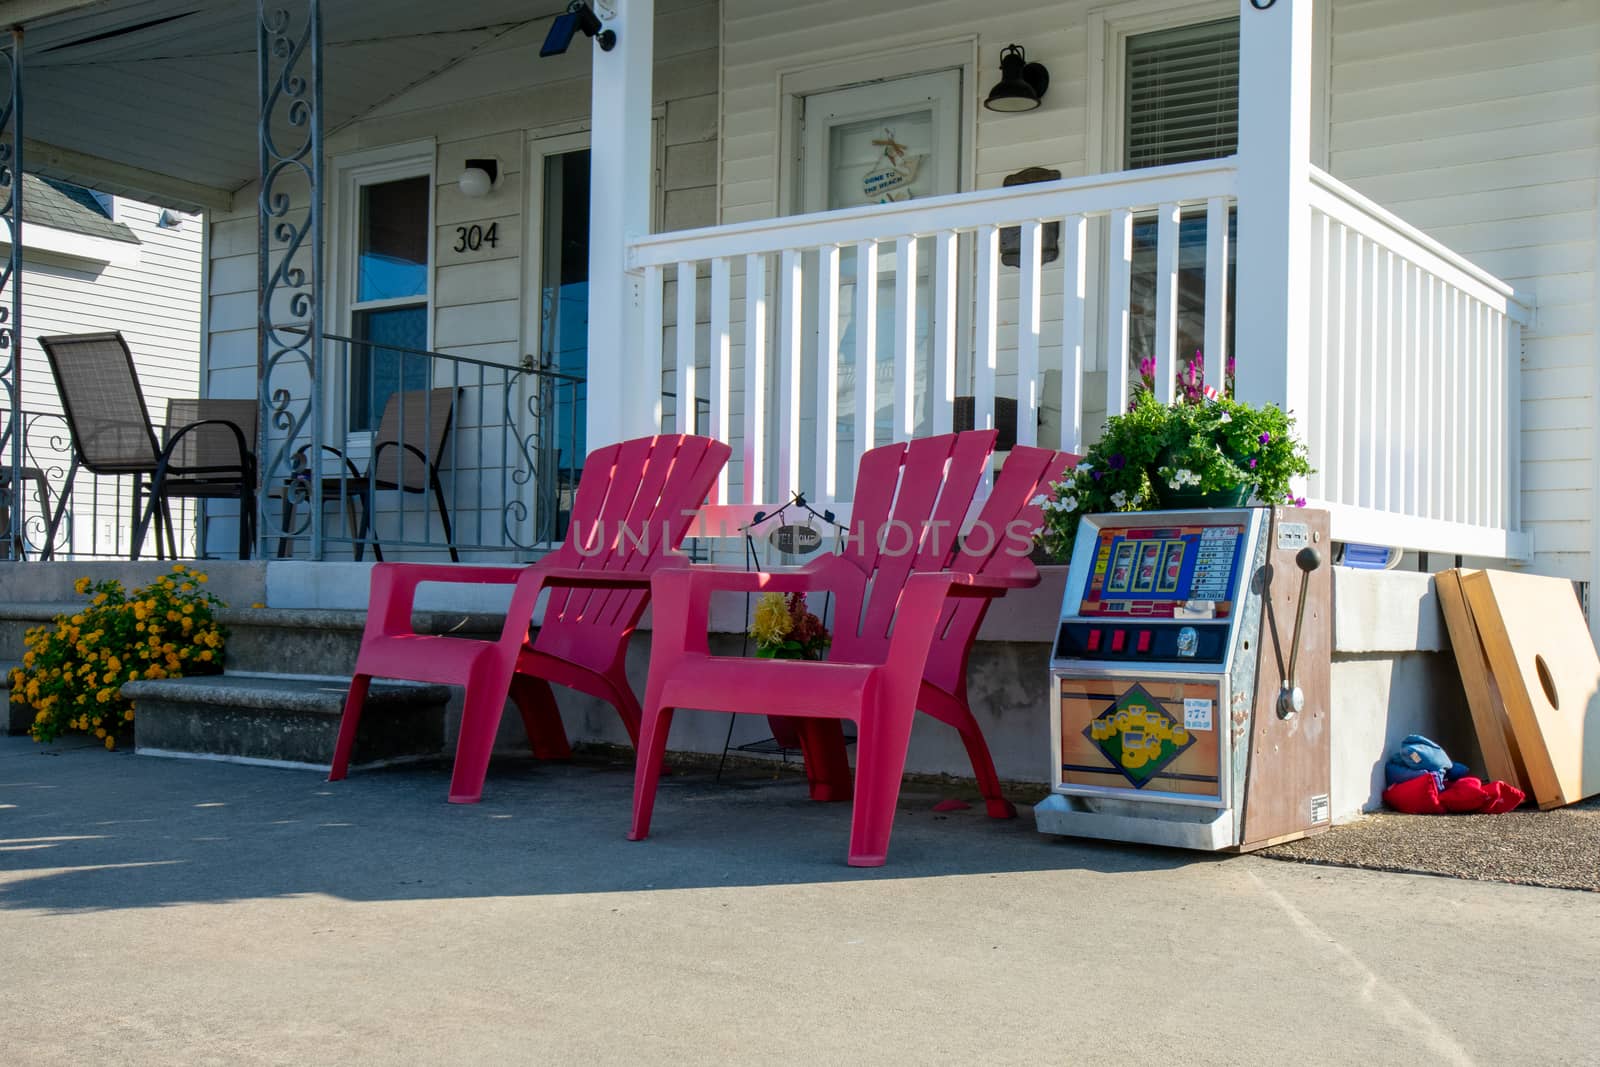 The Front of a Beach House With Two Red Lawn Chairs and a Slot Machine Next to Them